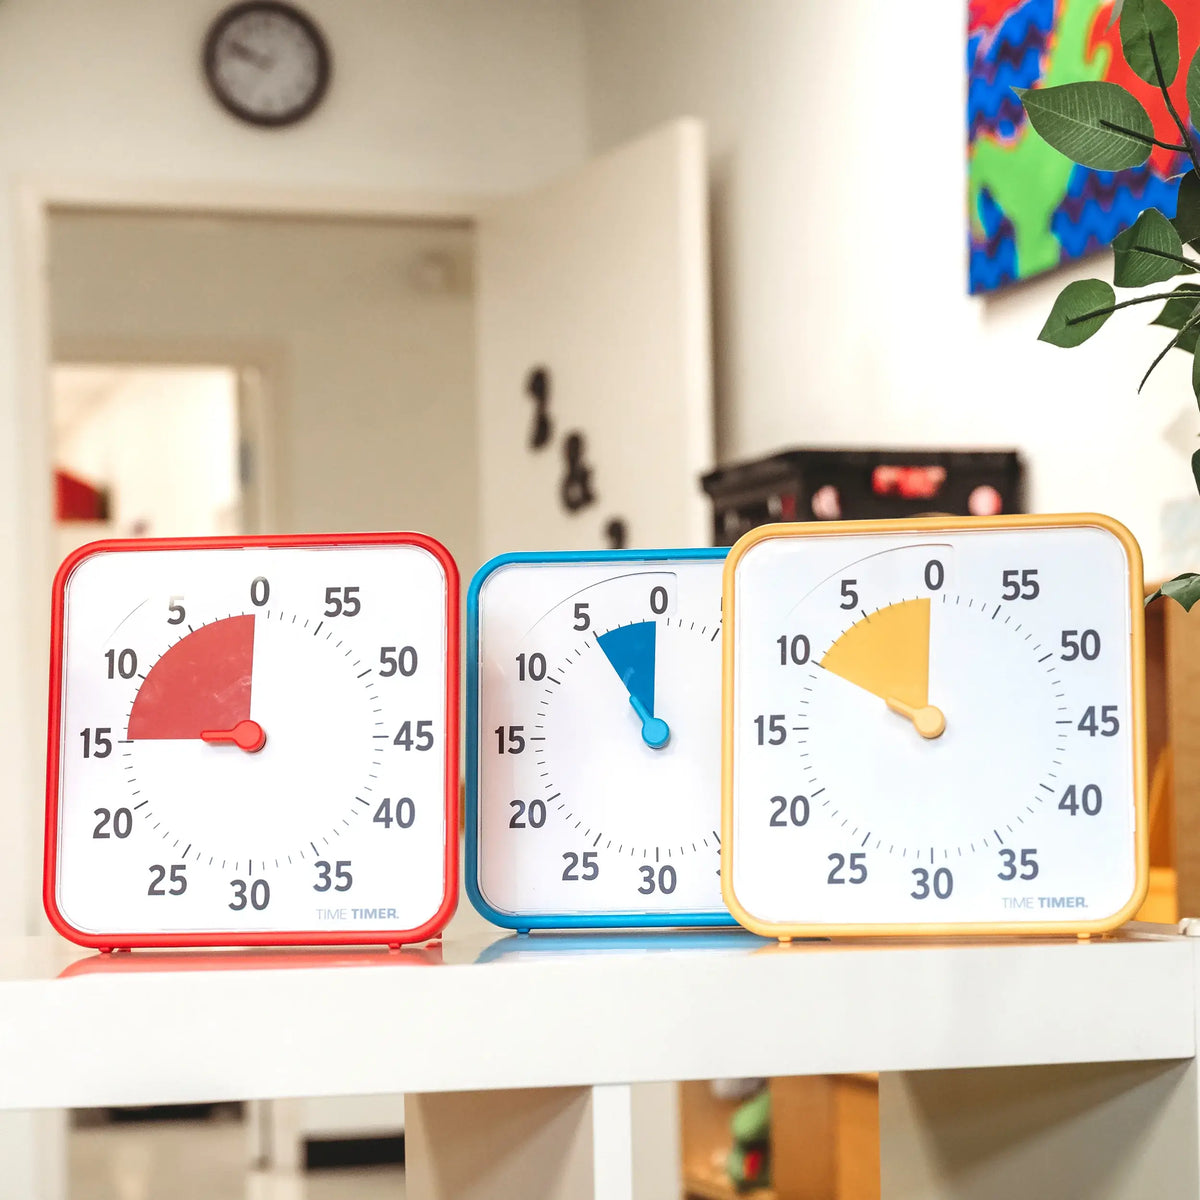 Primary Colour Time Timer 8 Learning Center Classroom Set